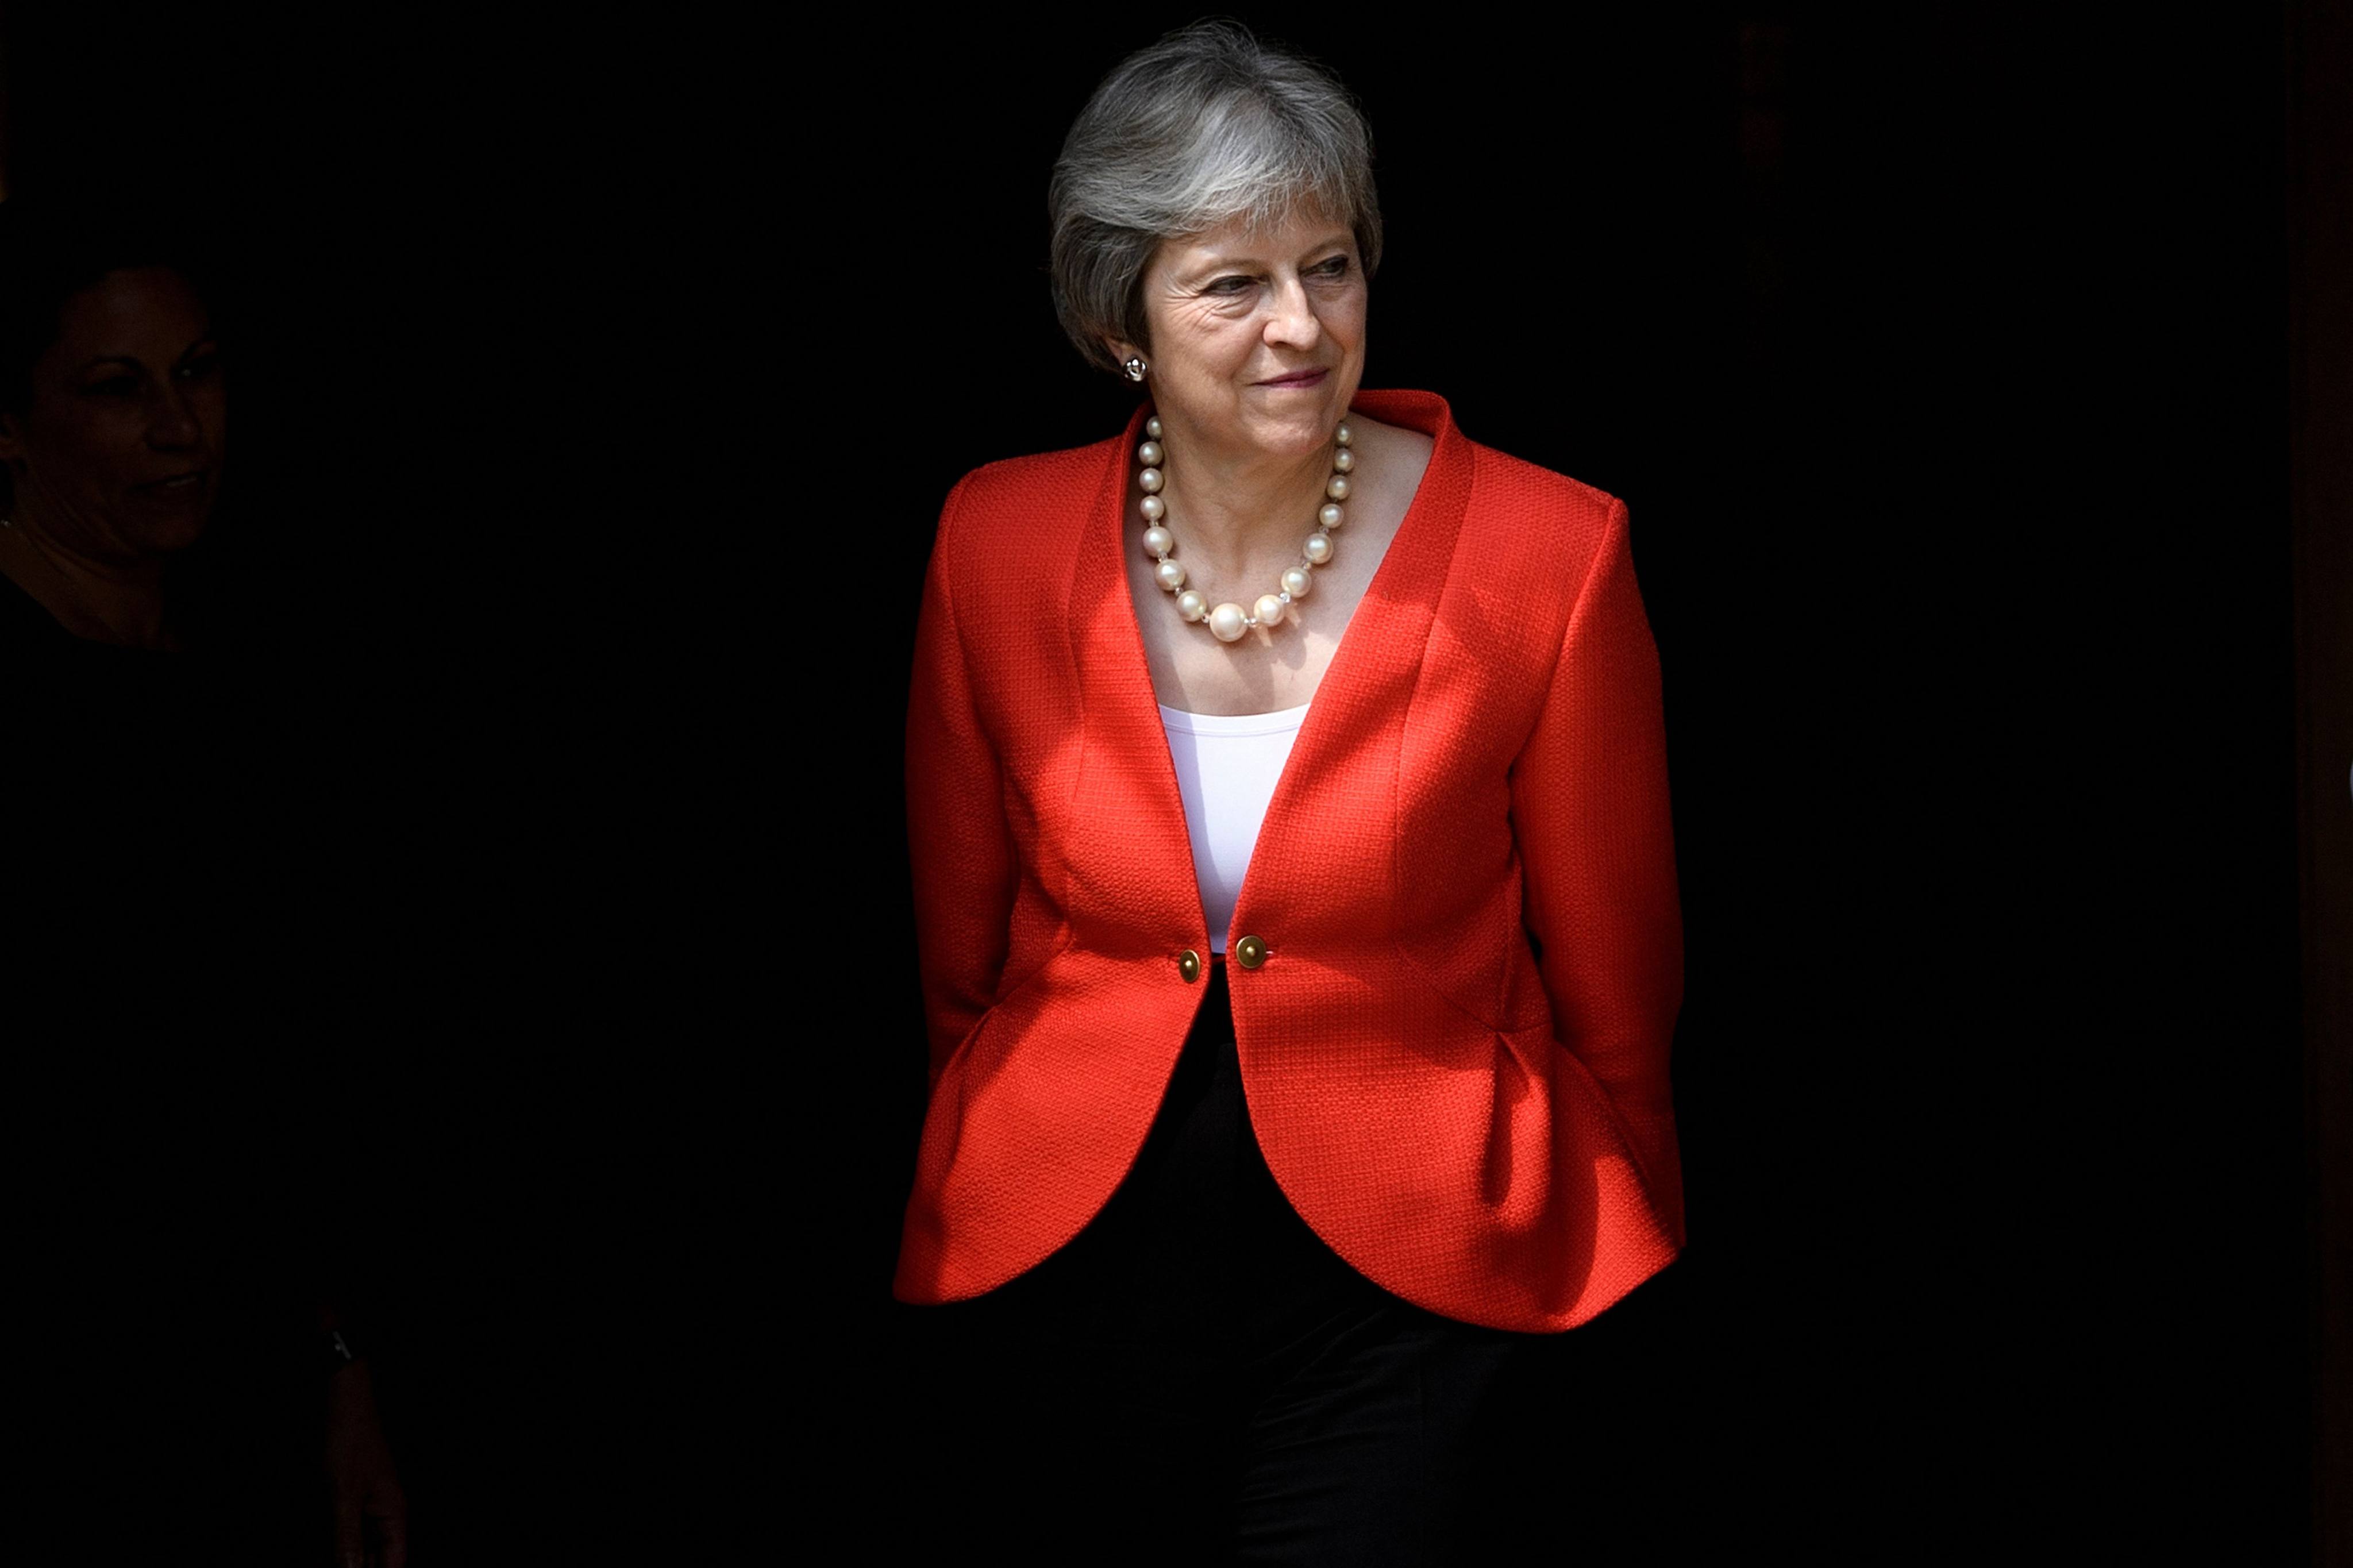 Britain’s former Prime Minister Theresa May announced that she will stand down as a member of parliament at the next general election, due to take place later this year. Photo: AFP